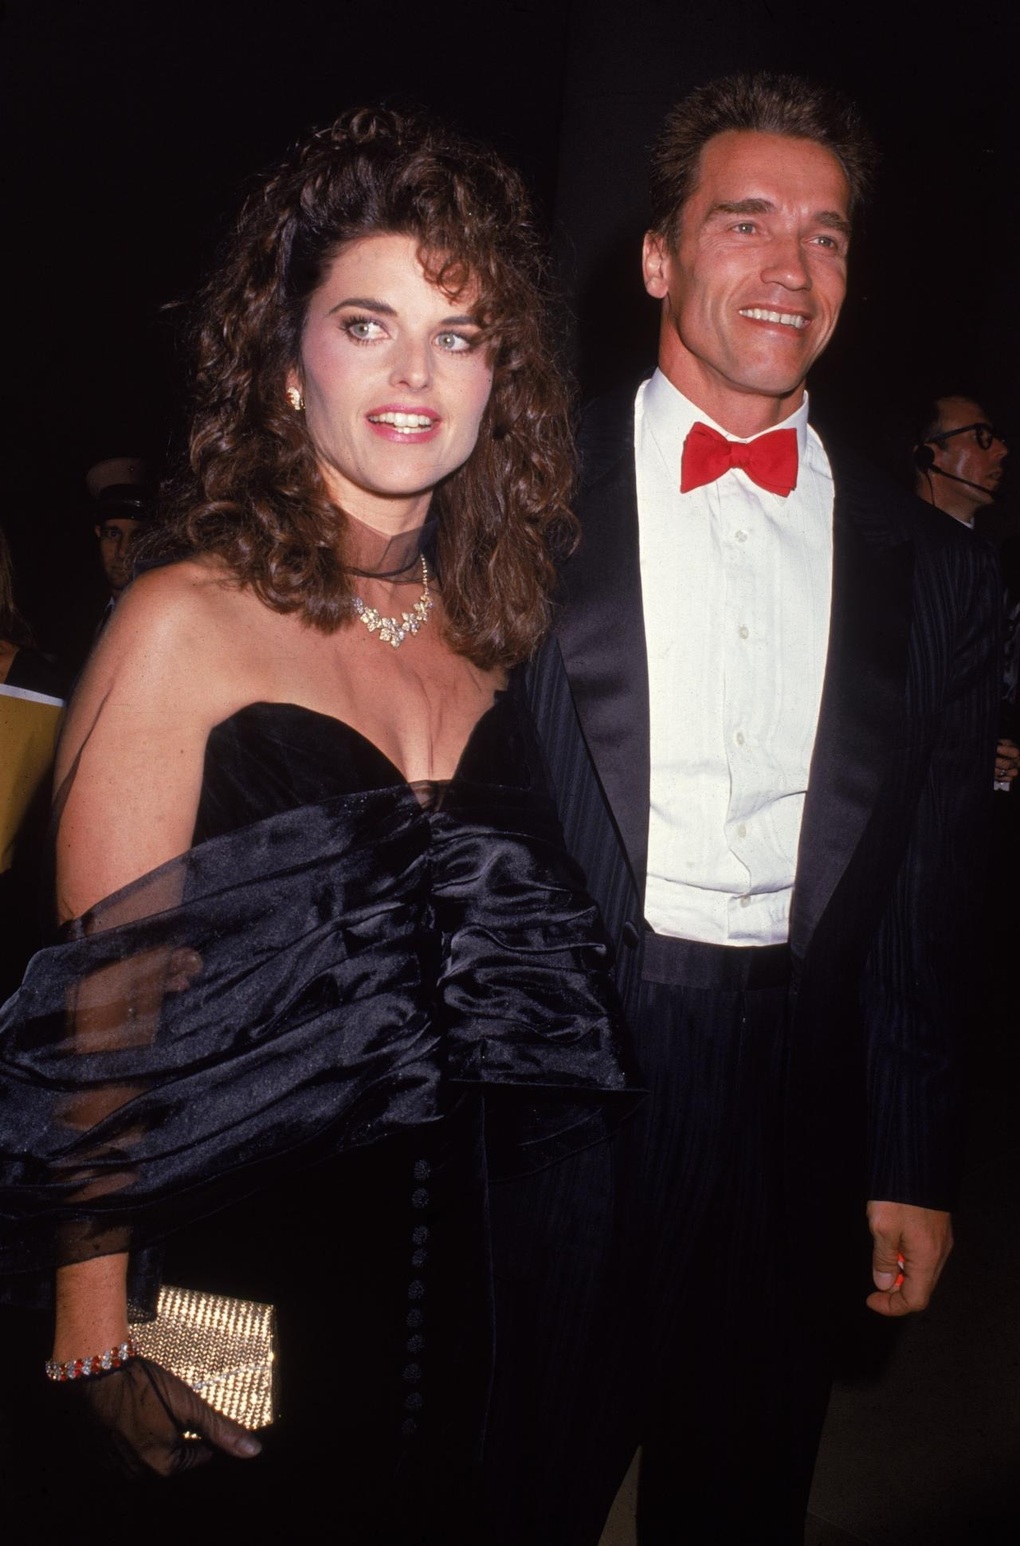 Even though he cuckolded his wife, Arnold Schwarzenegger affirmed that he would love his wife all his life - 5